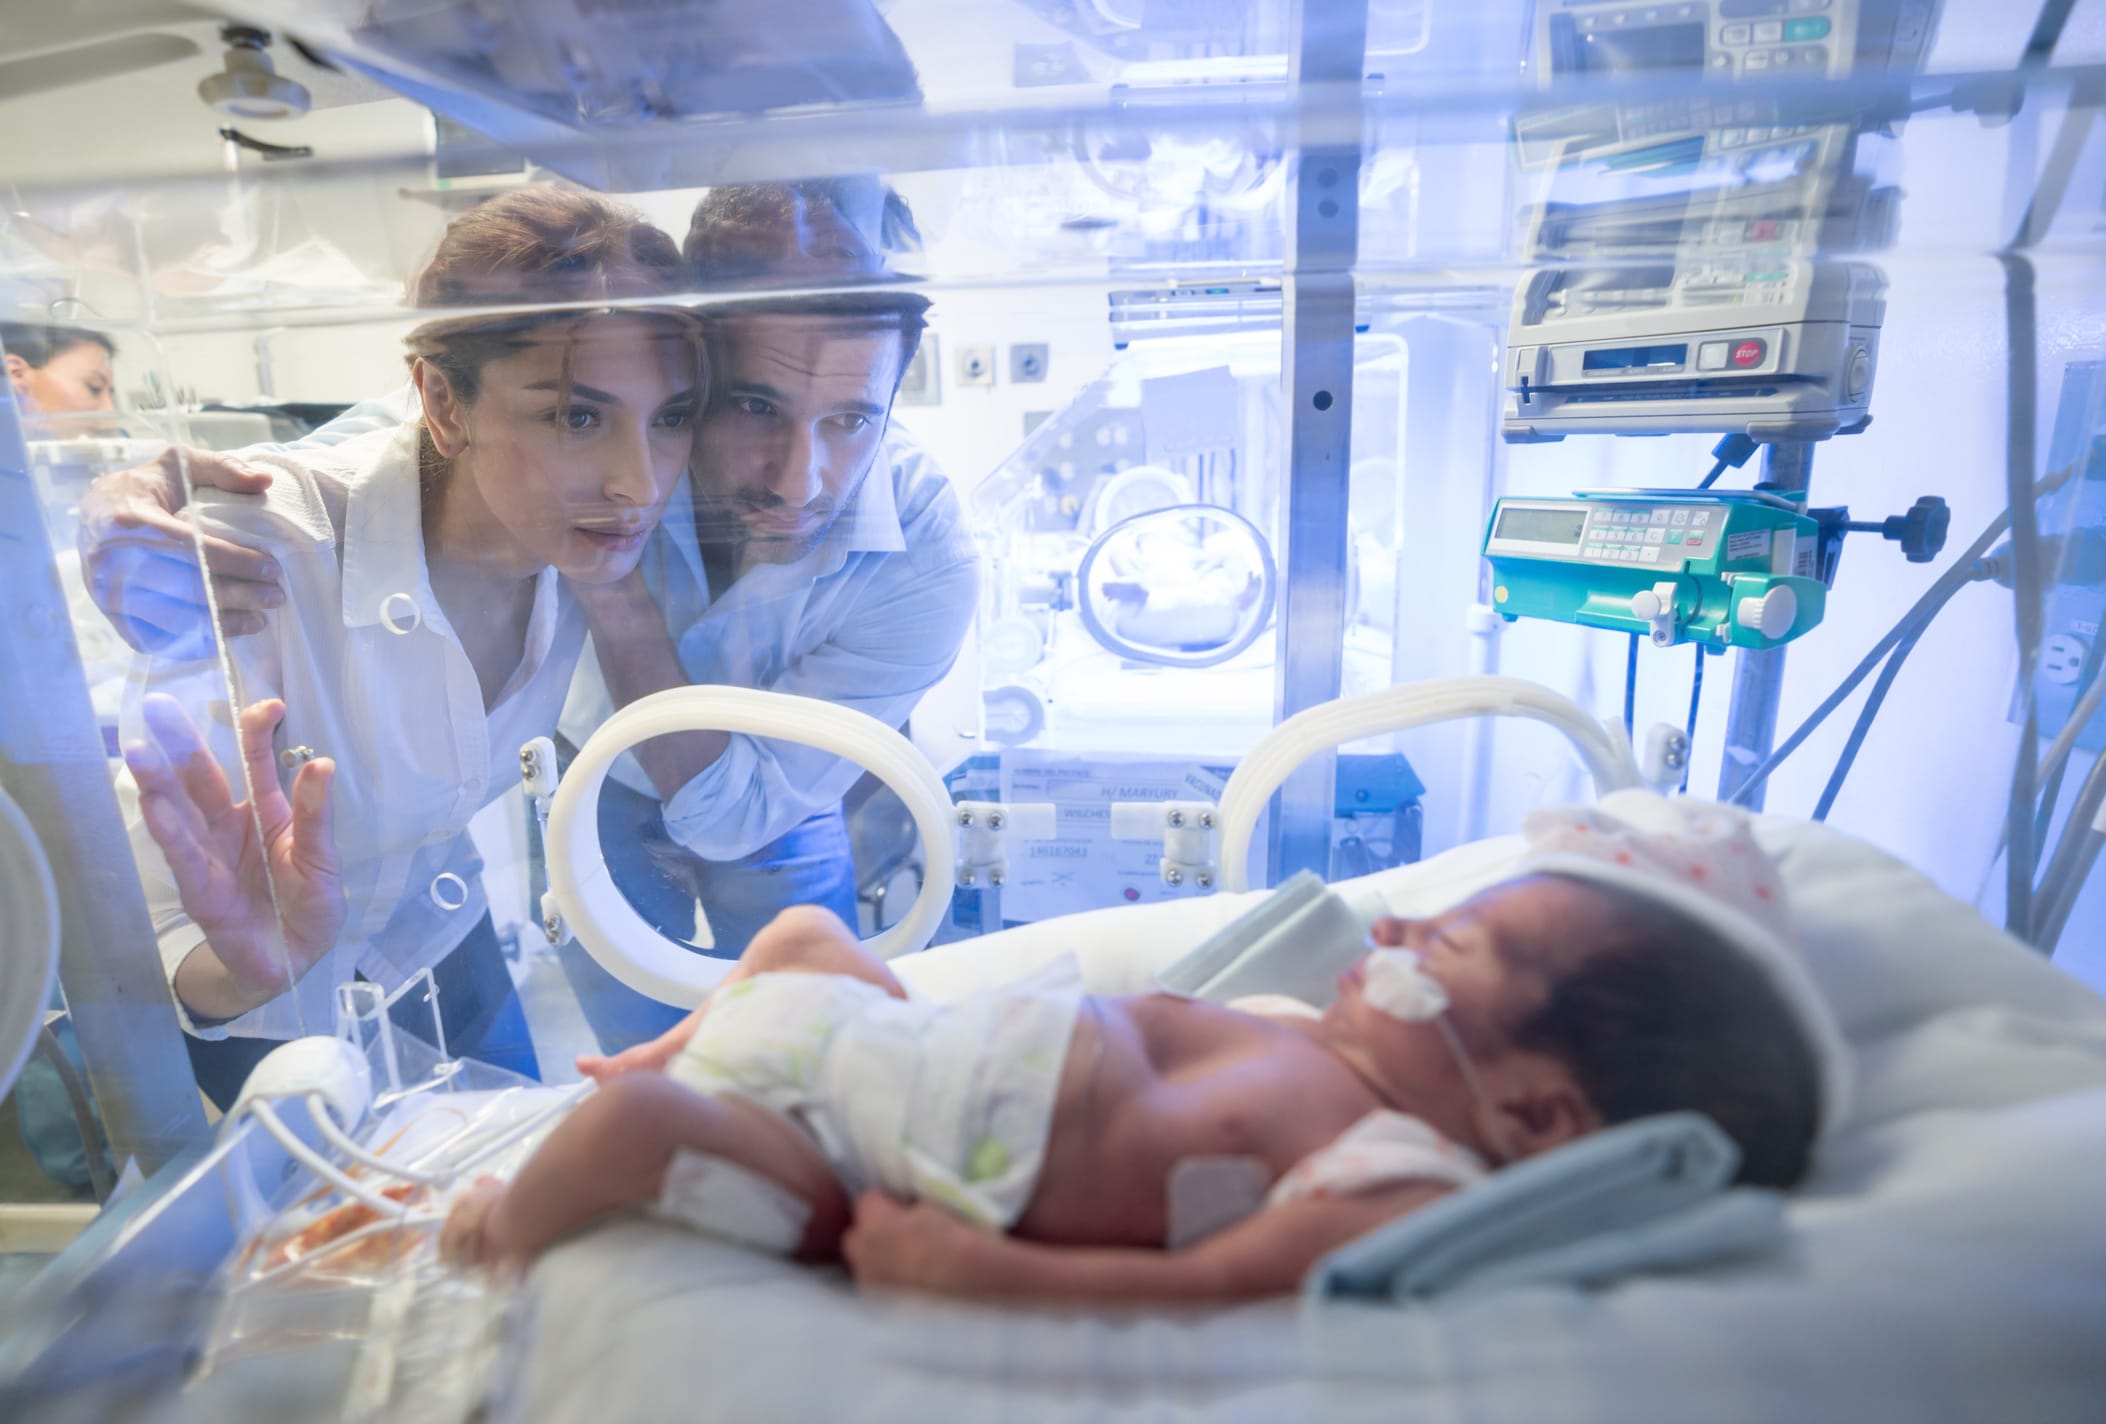 Social Security for Premature Babies: Get SSI for Your Preemie